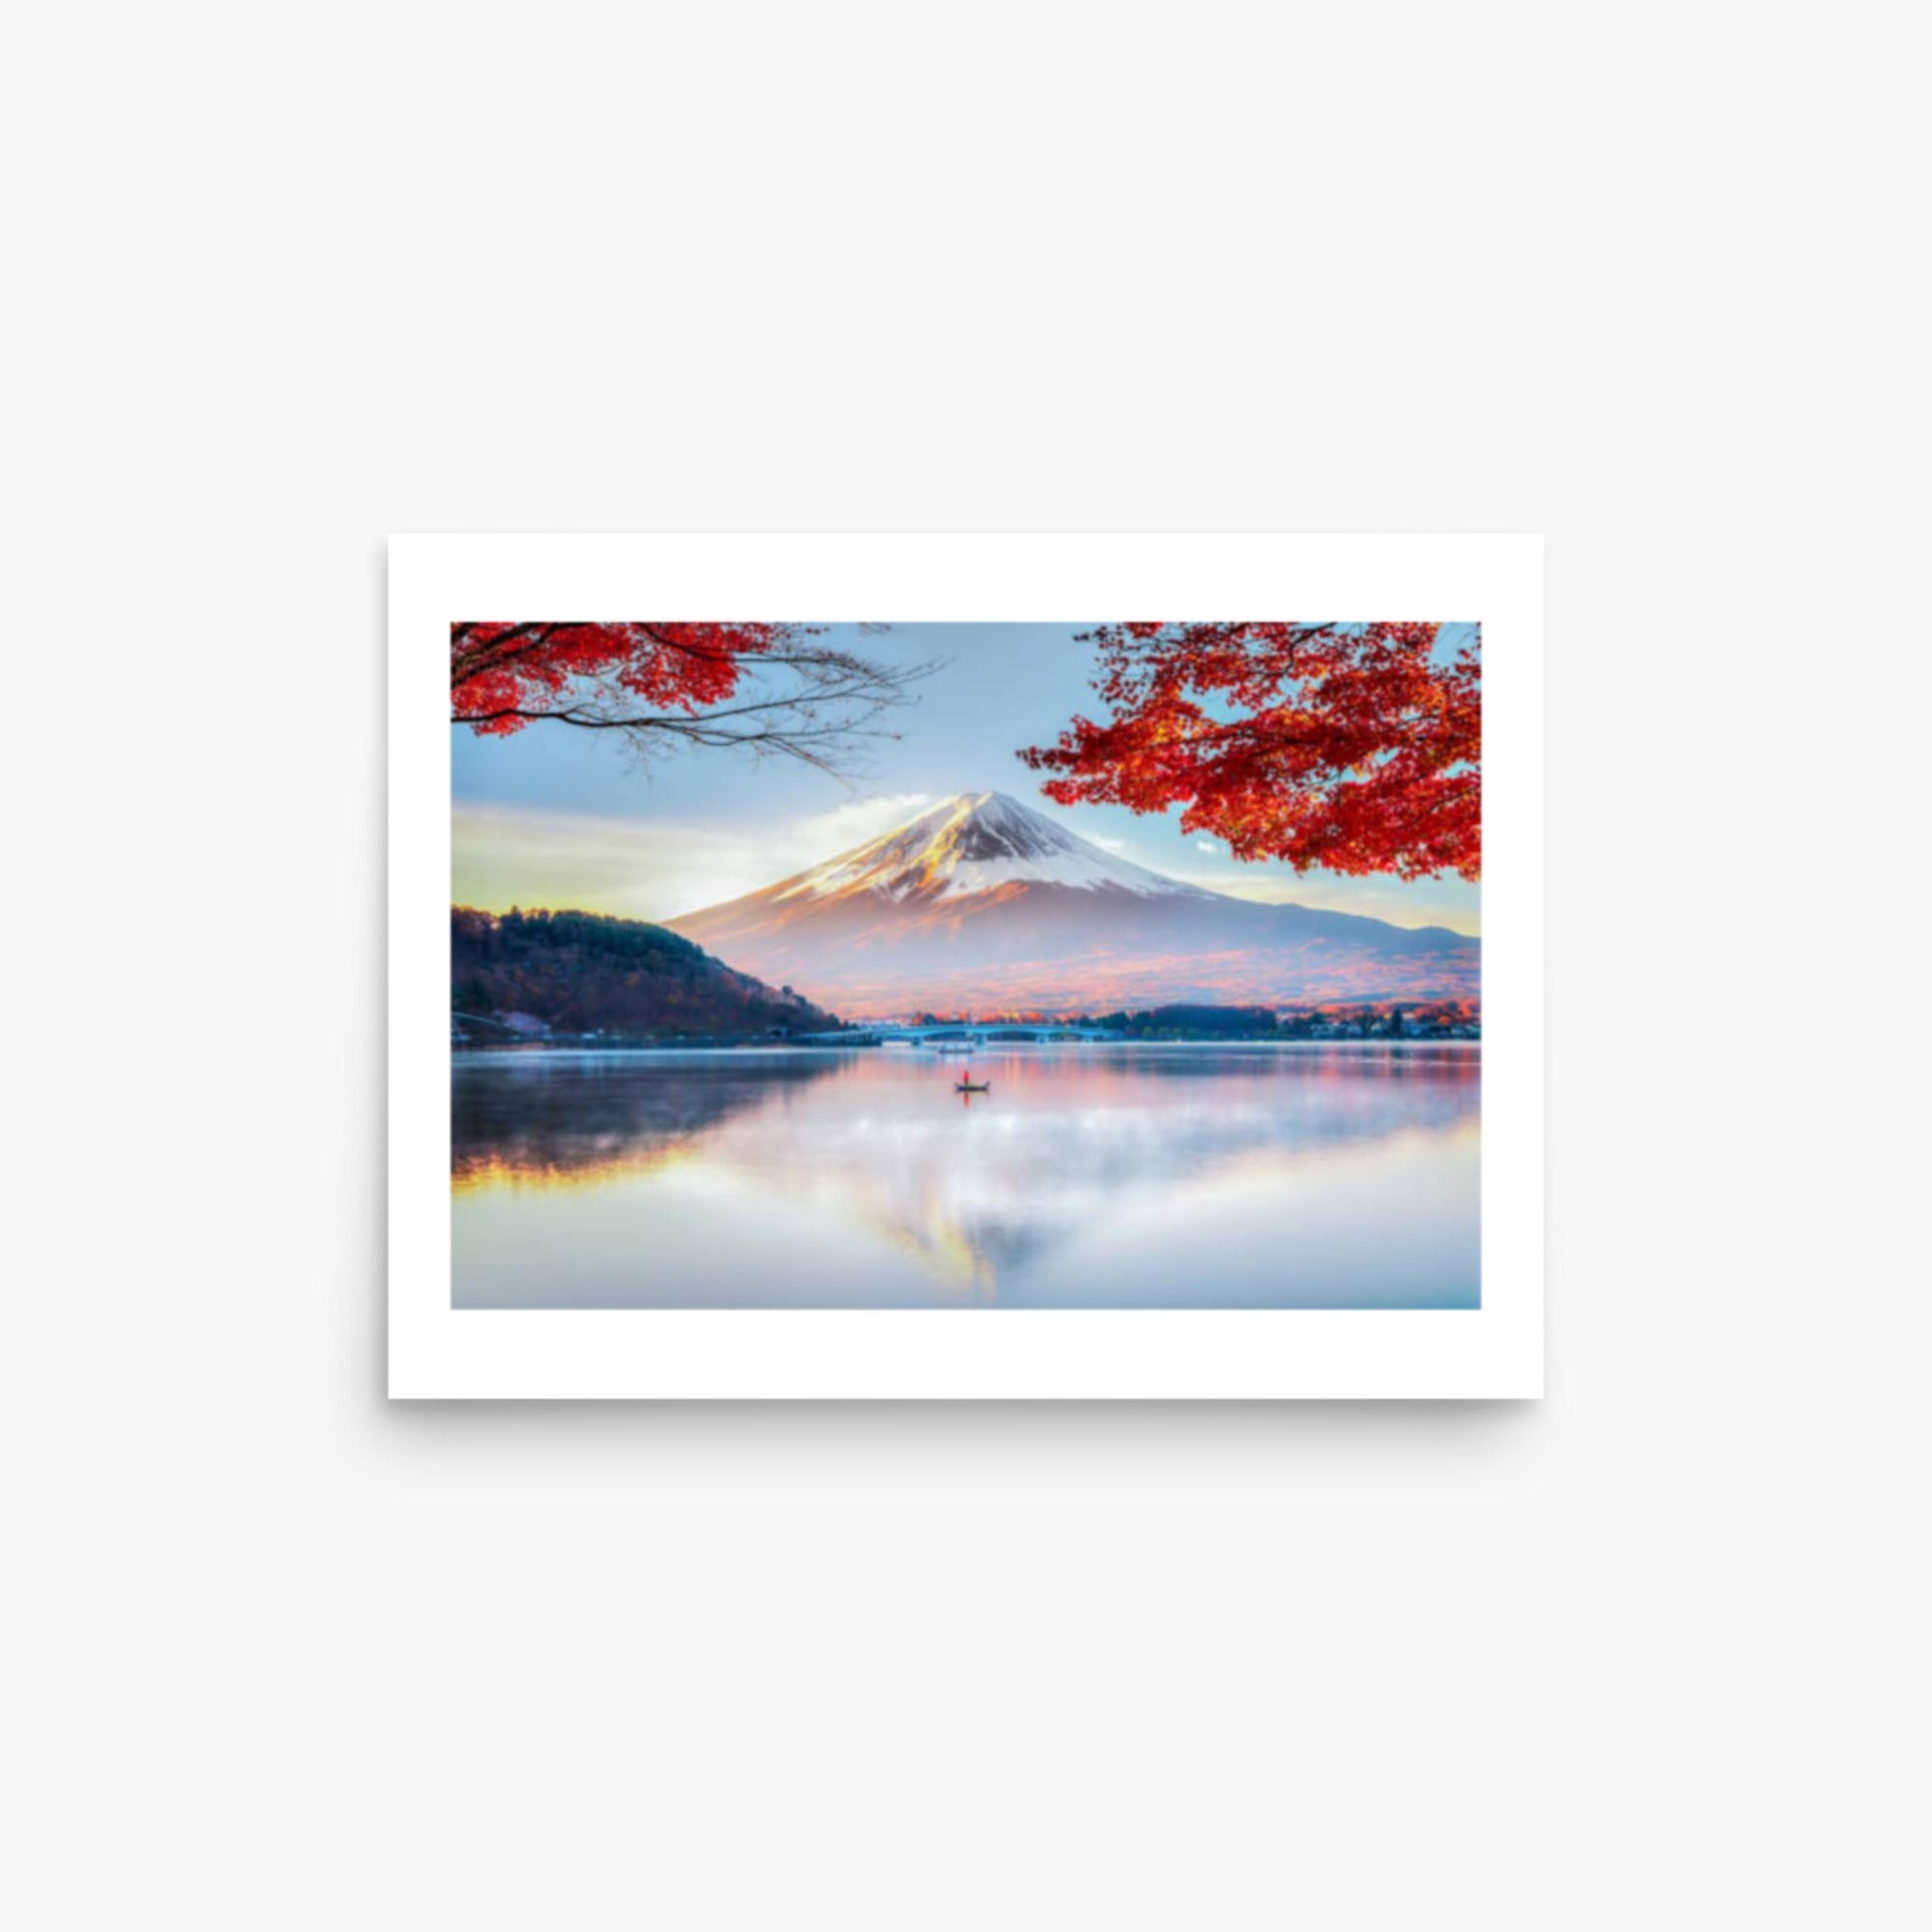 Fuji Mountain , Red Maple Tree and Fisherman Boat with Morning Mist in Autumn, Kawaguchiko Lake, Japan 12x16 in Poster